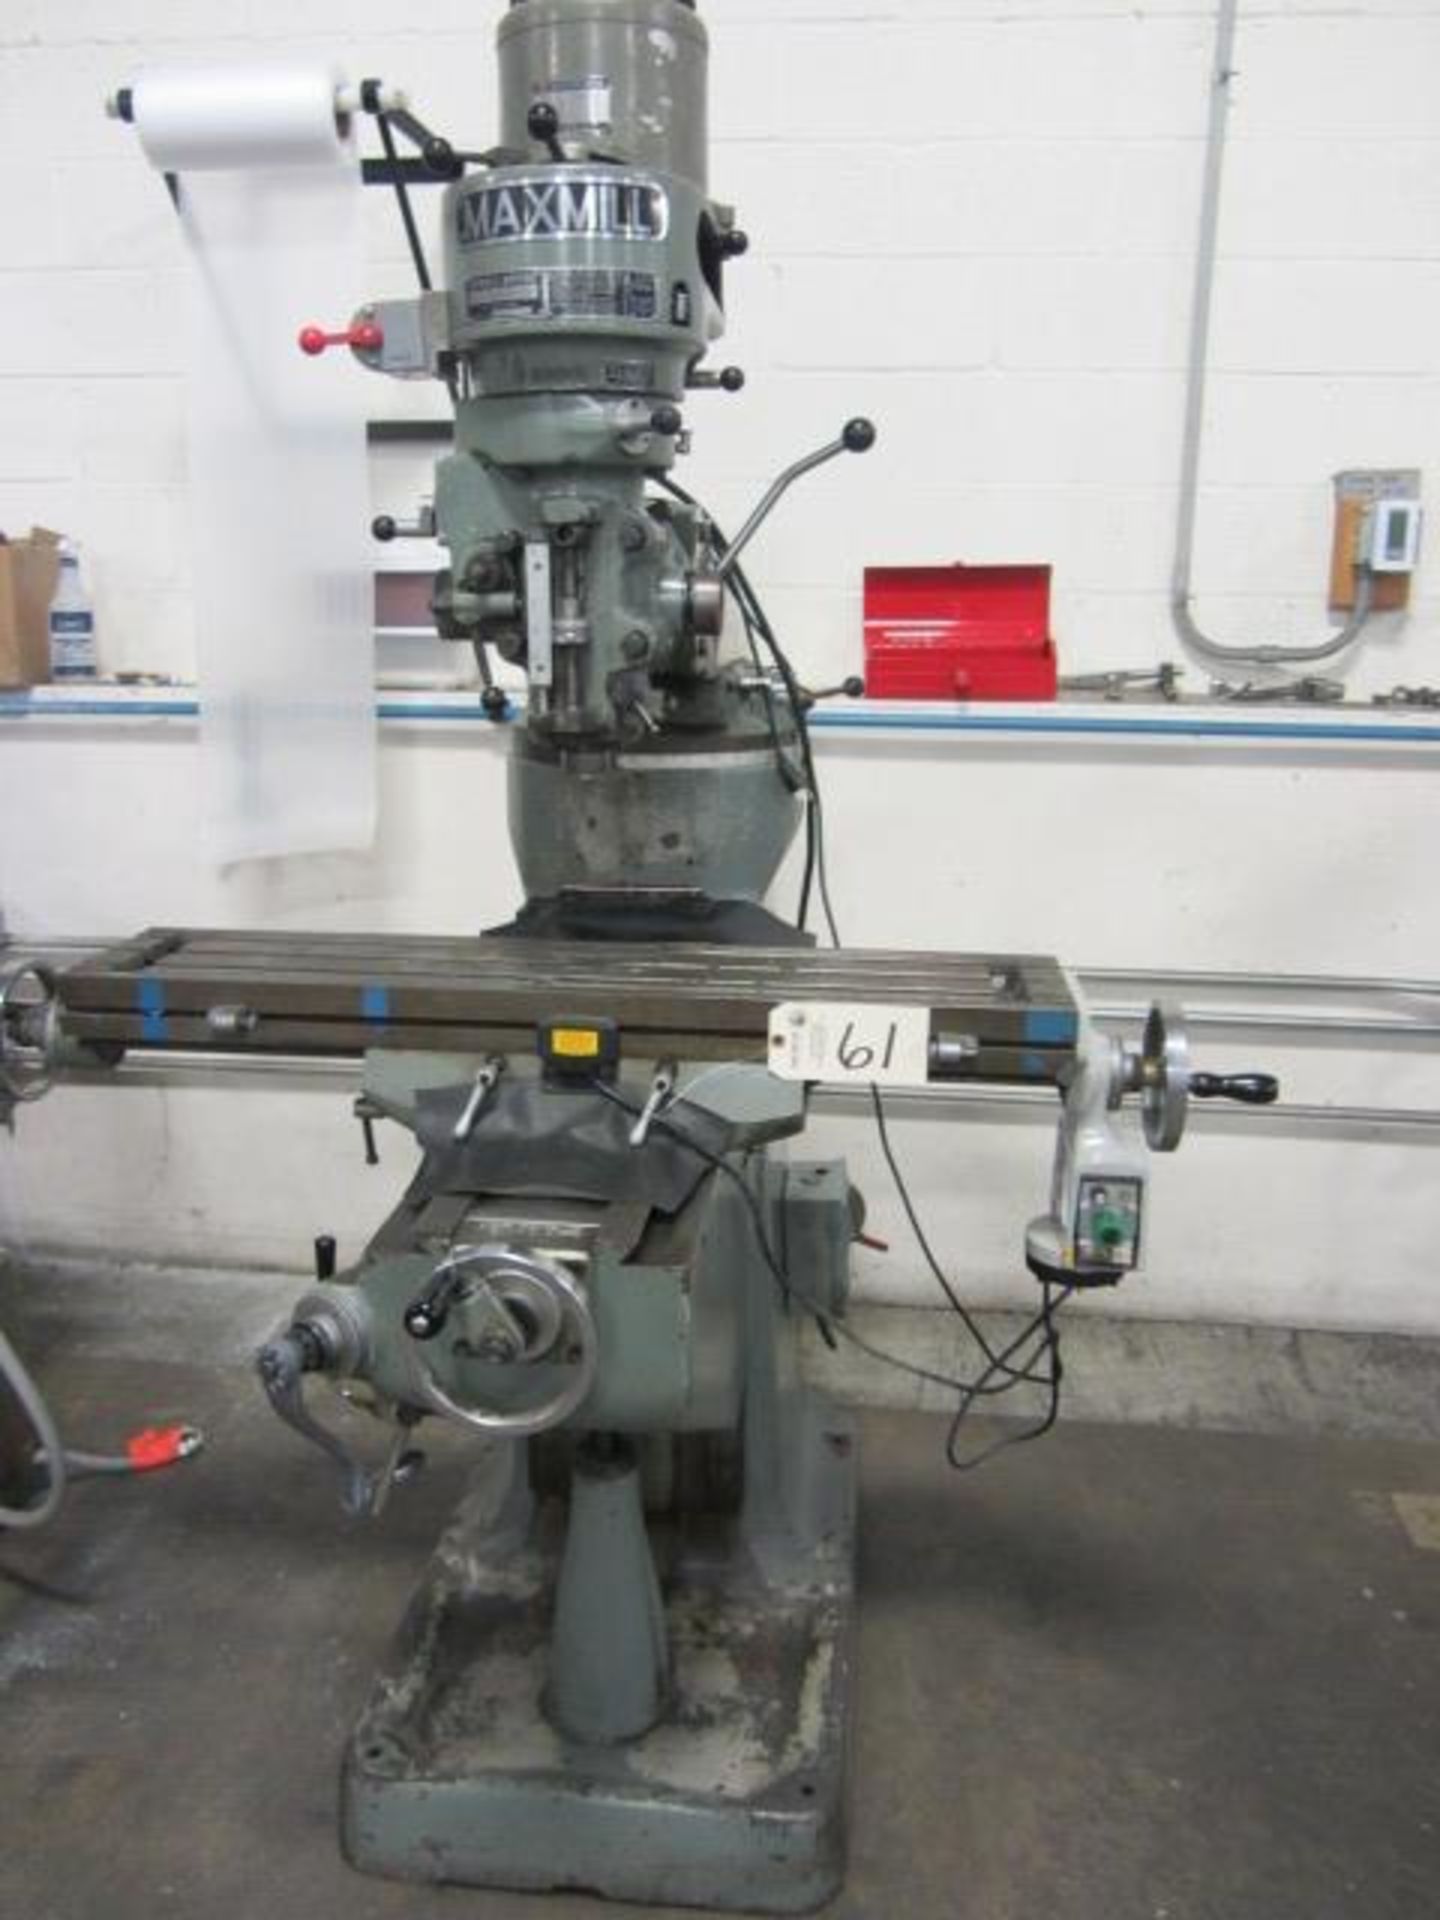 Maxmill Vertical Milling Machine with 9'' x 42'' Power Feed Table, R-8 Spindle Speeds to 2720 RPM, - Image 3 of 6